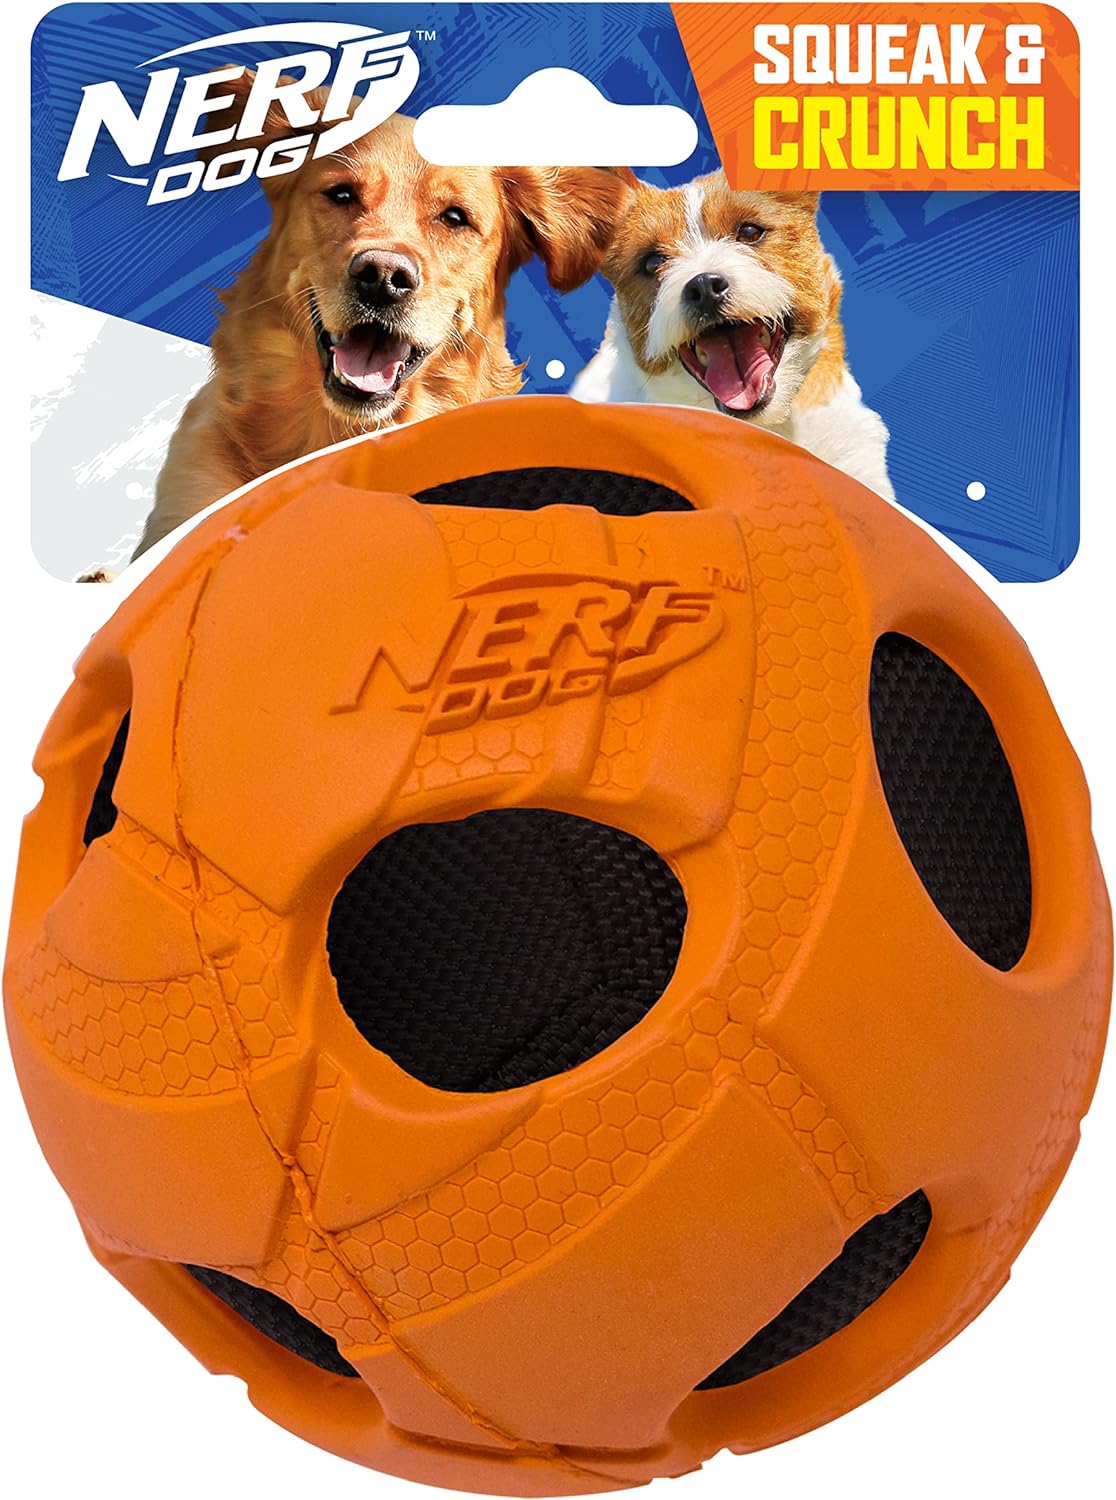 Nerf Products 3220 Bash Crunch Ball, Large, Orange, One-Size-for-Most